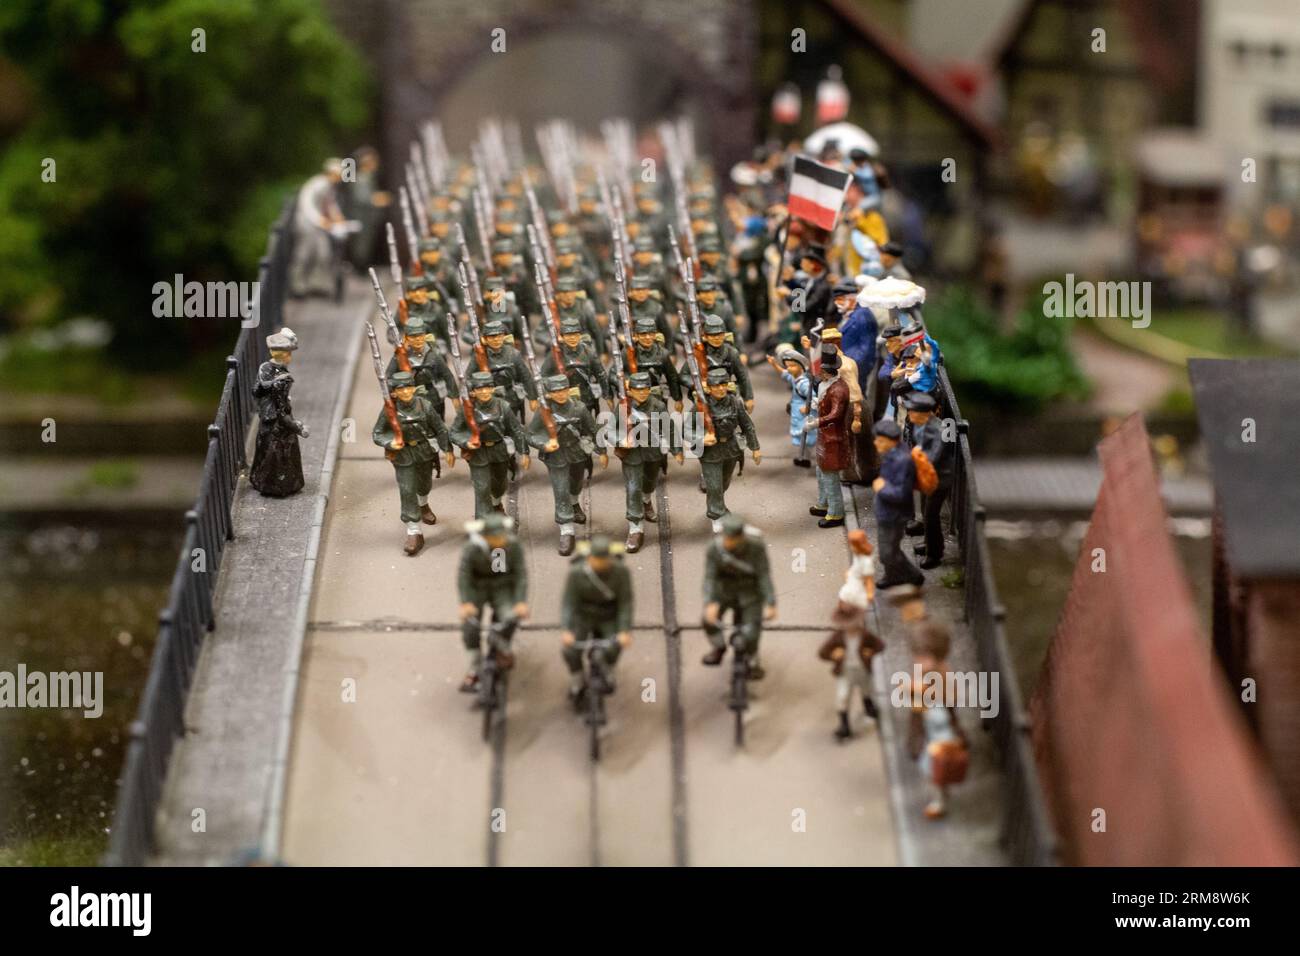 Miniature diorama at Miniatur Wunderland in Hamburg, Germany, depicting soldiers parading across a bridge through a group of civilians Stock Photo